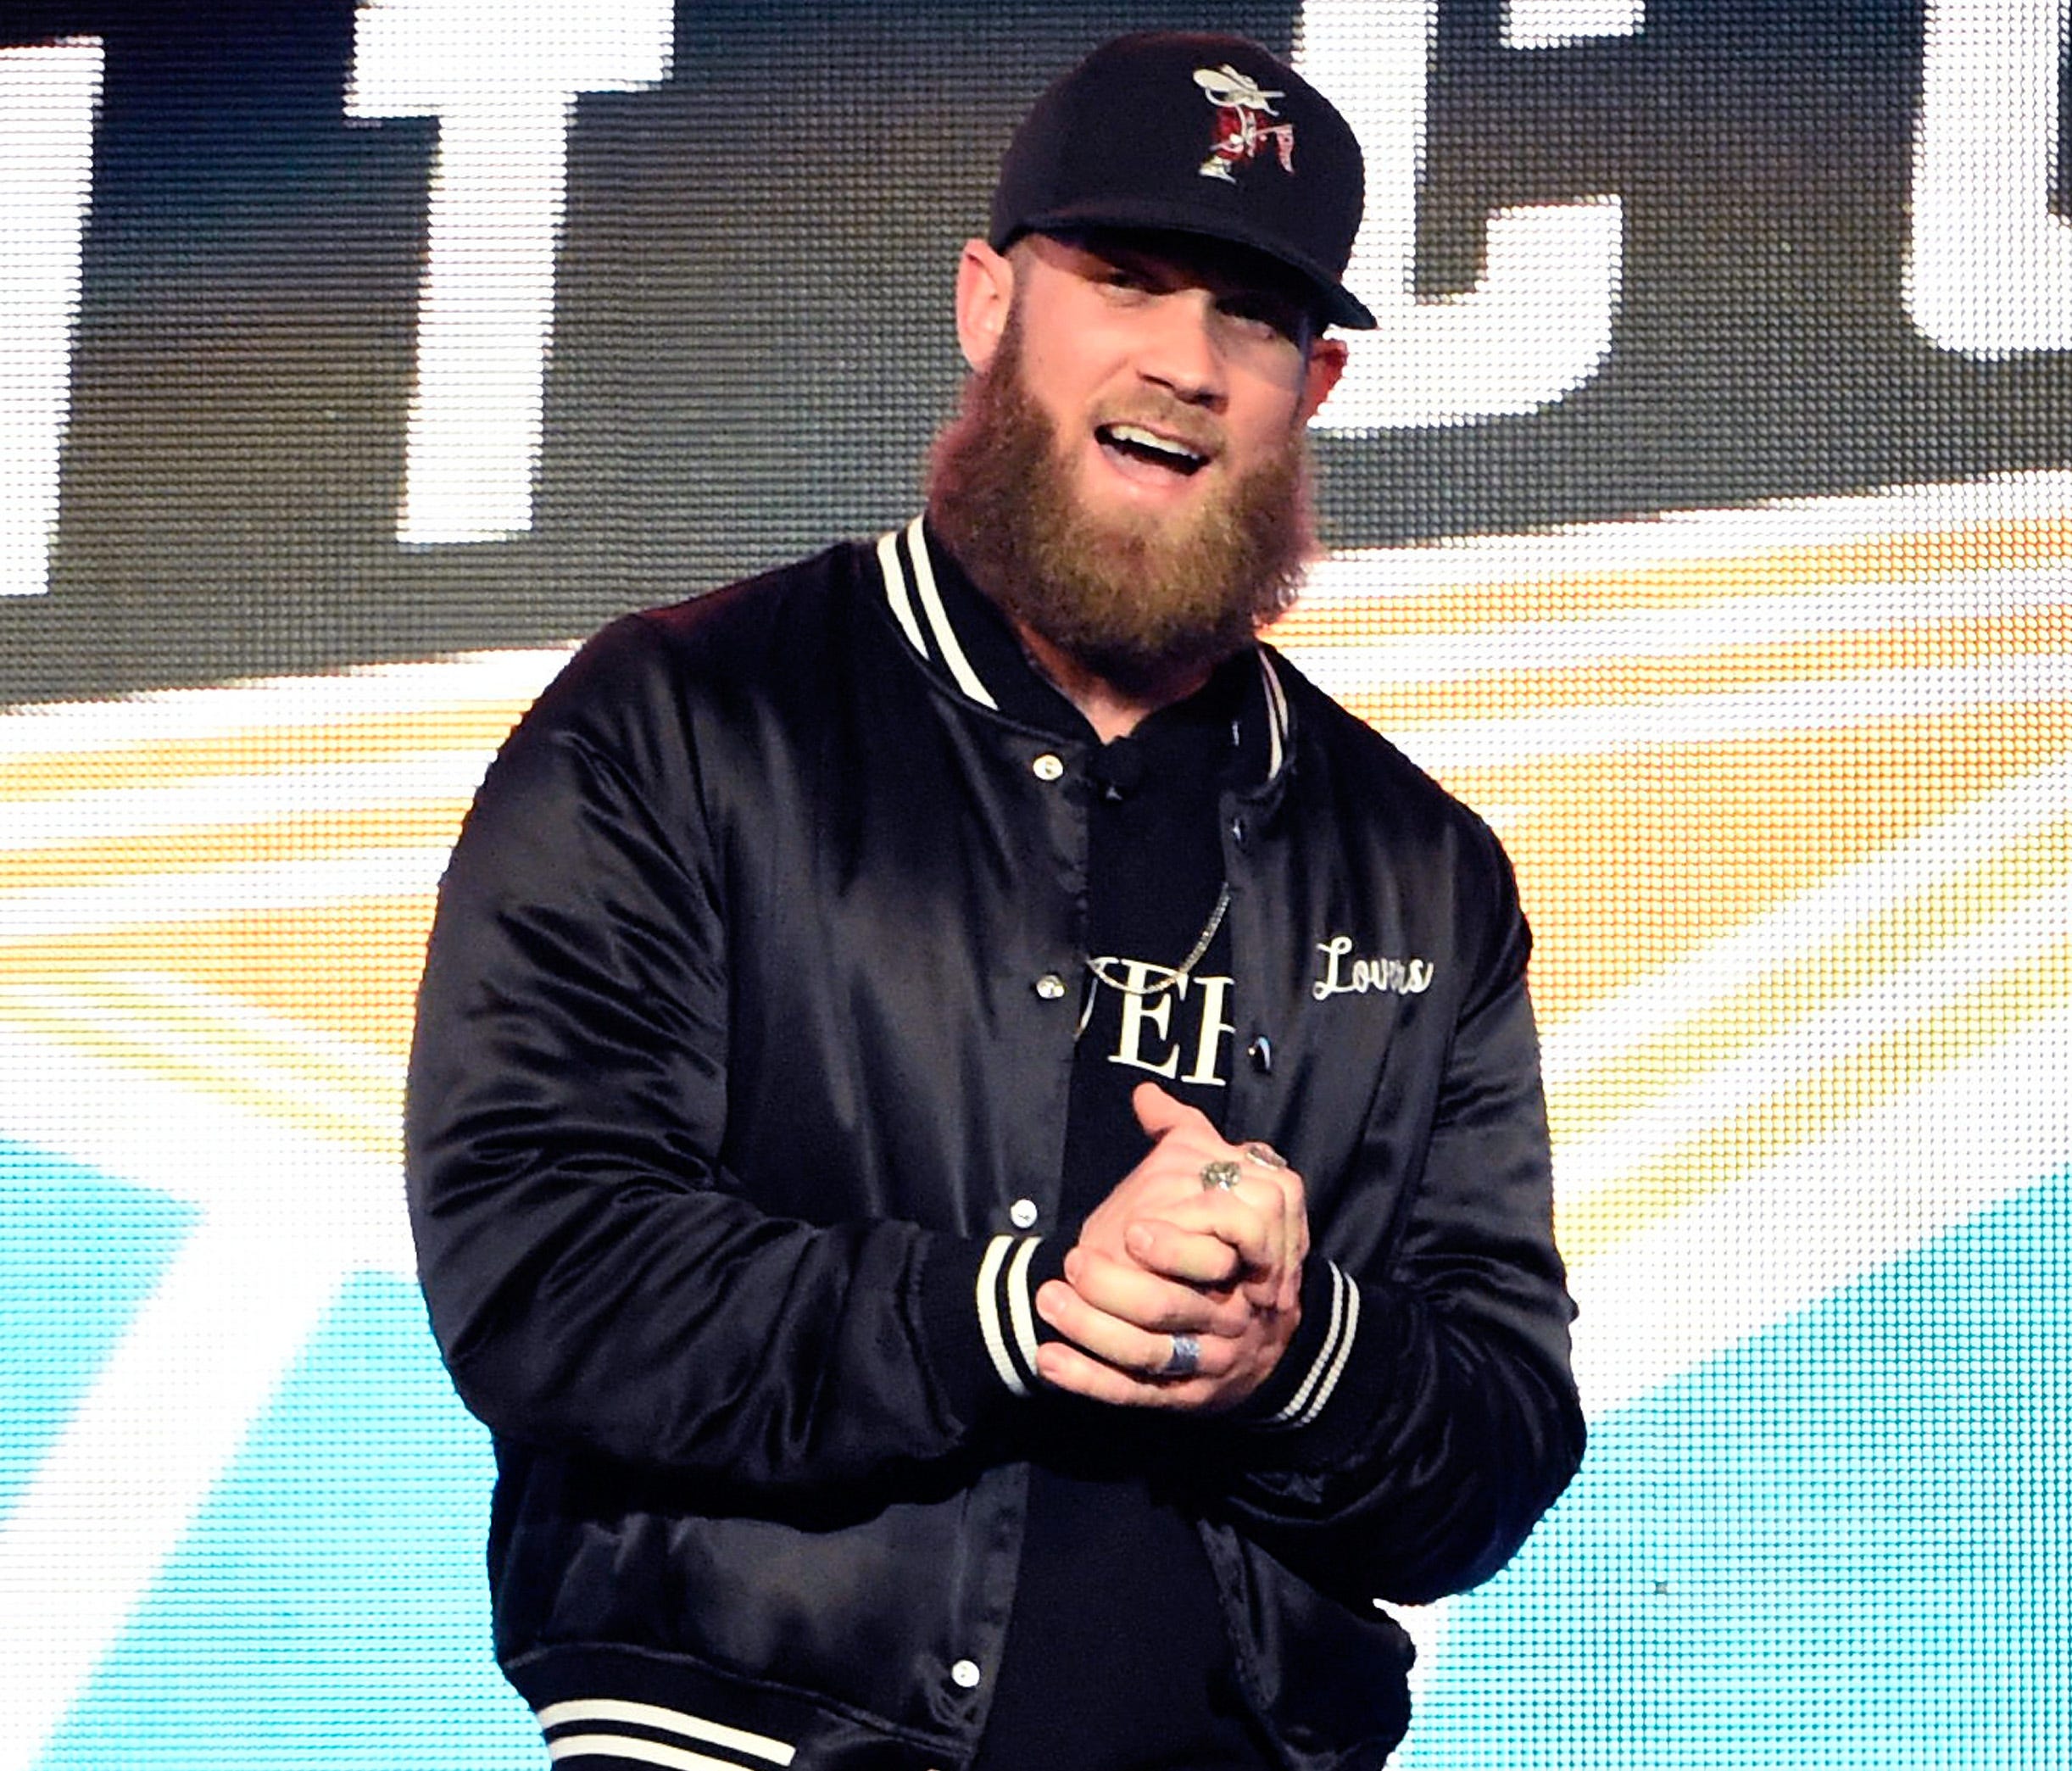 As Bryce Harper appeared at a Vegas Strong Benefit Concert earlier this month, agent Scott Boras was discussing business matters with the Washington Nationals.